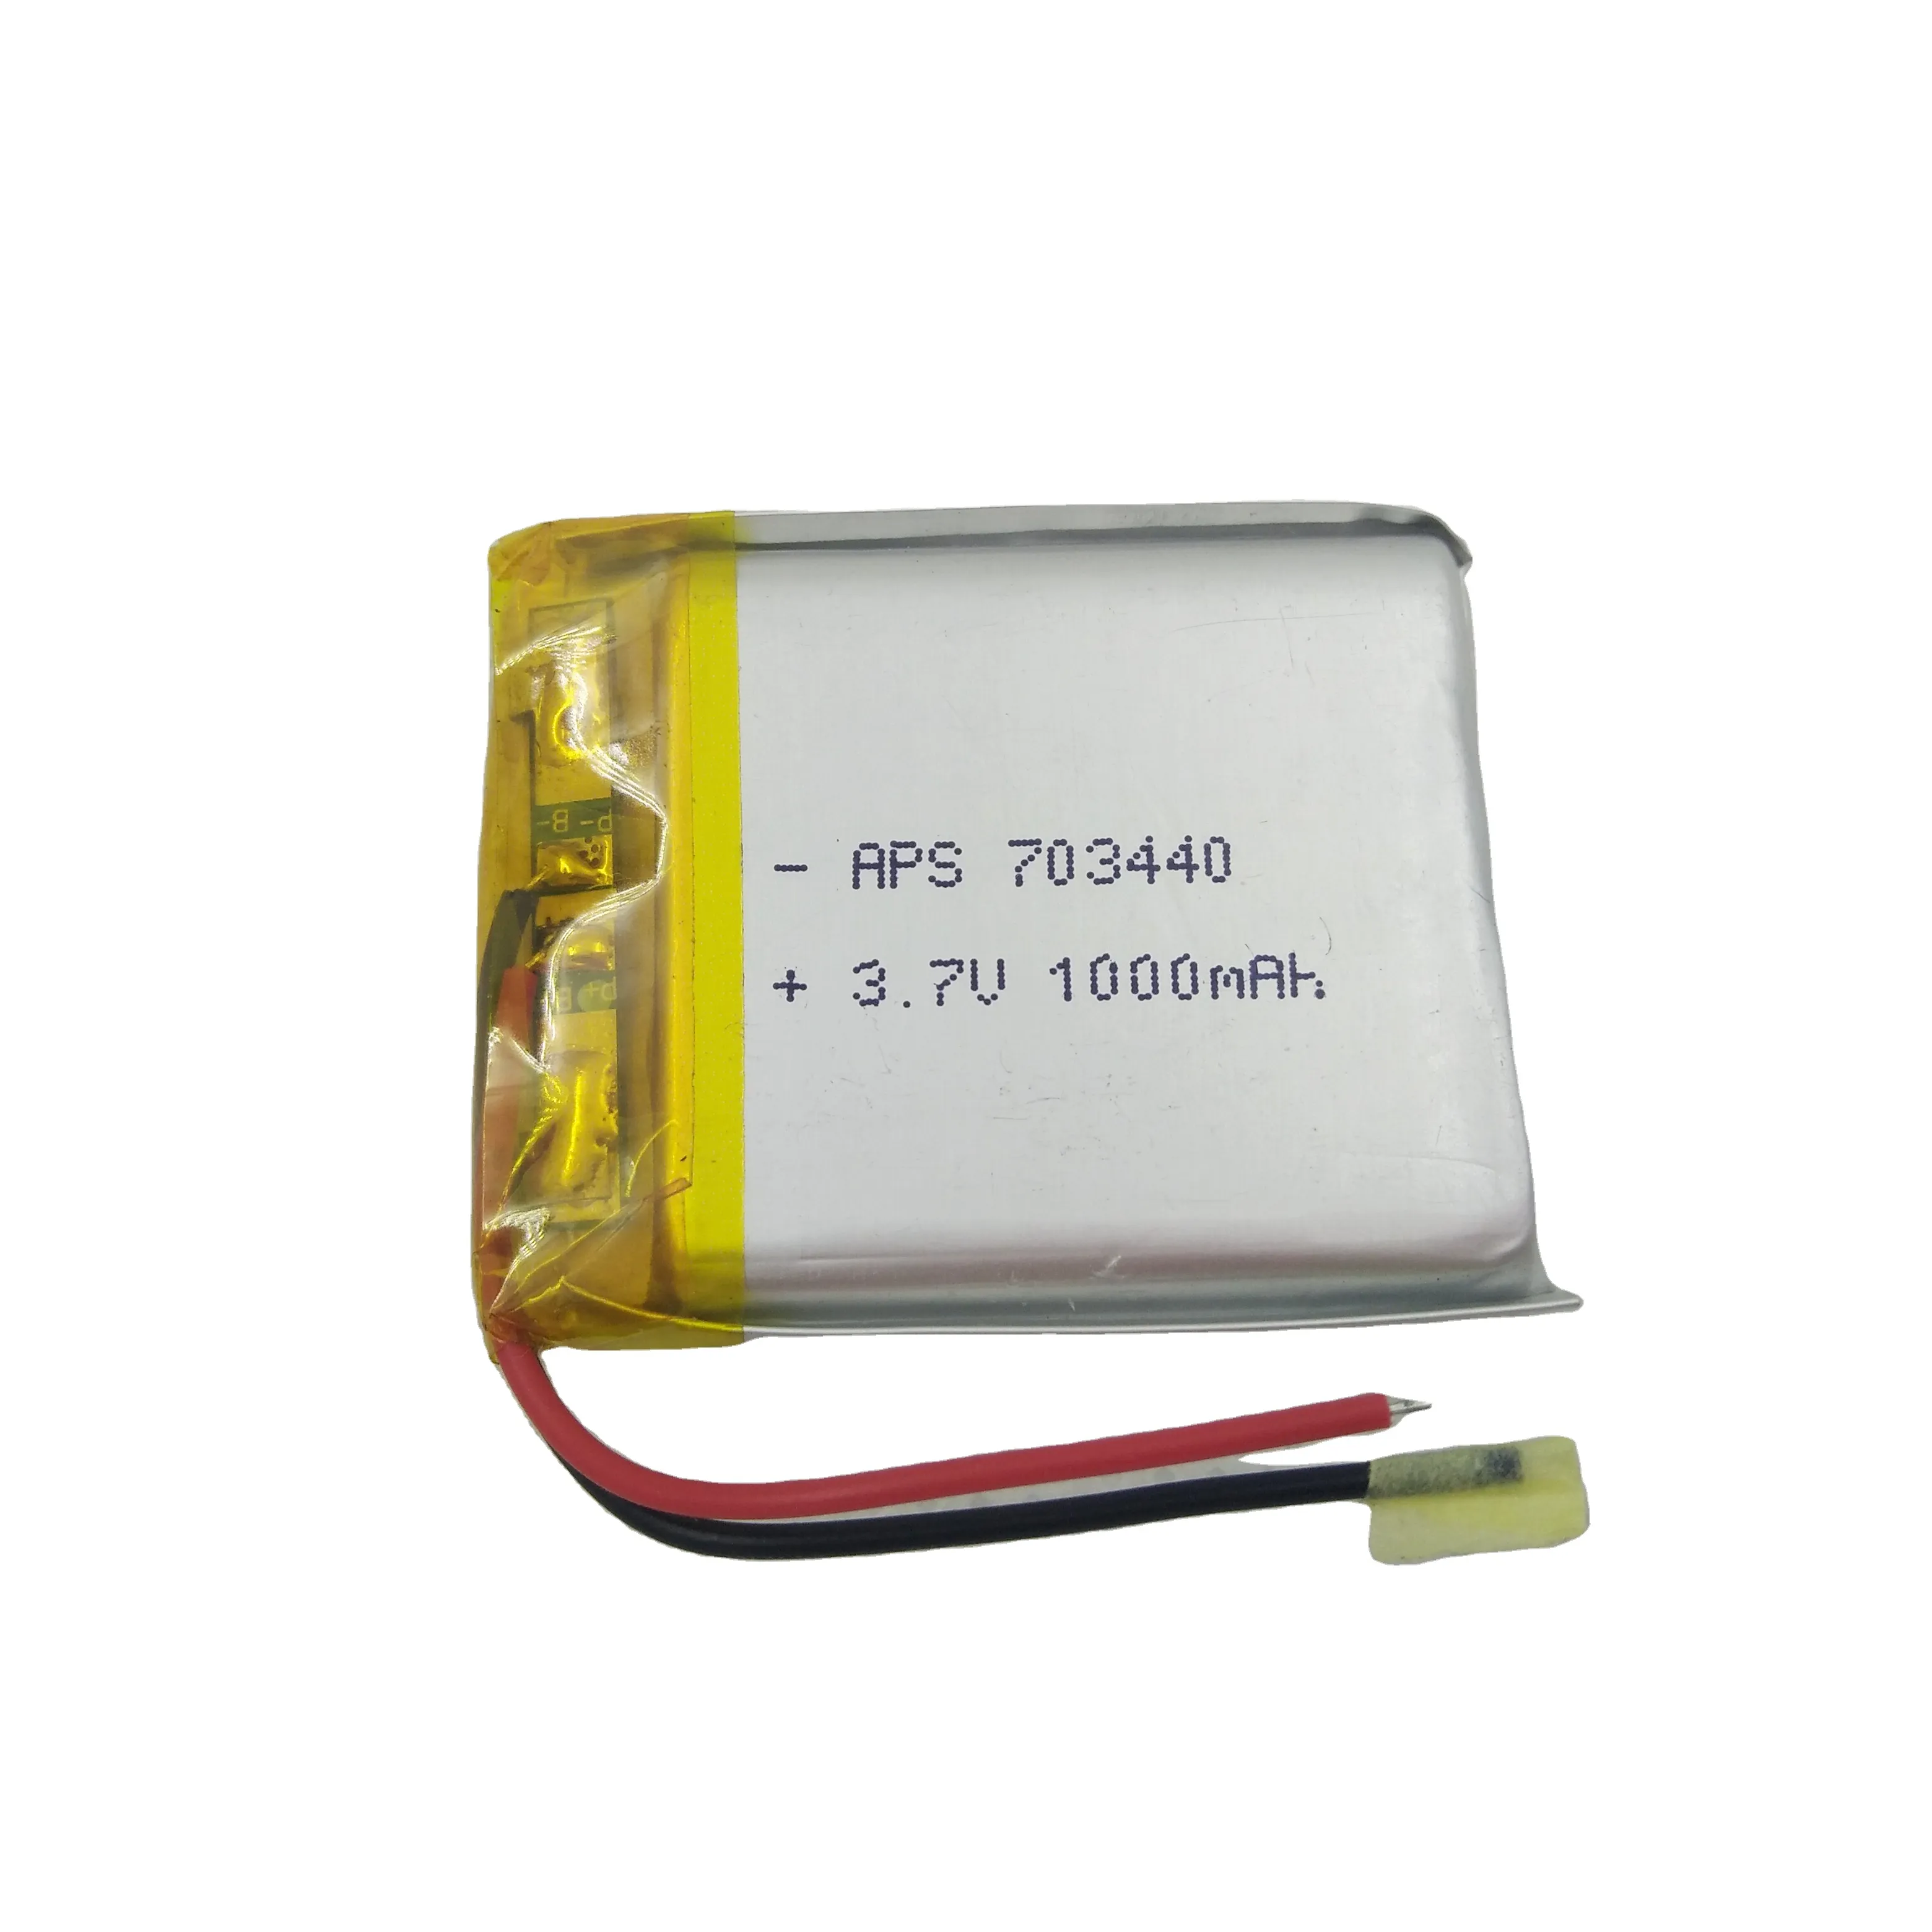 rechargeable 703440 3.7V 1000mAh polymer lithium ion battery full capacity deep cycle good quality good price for GPS